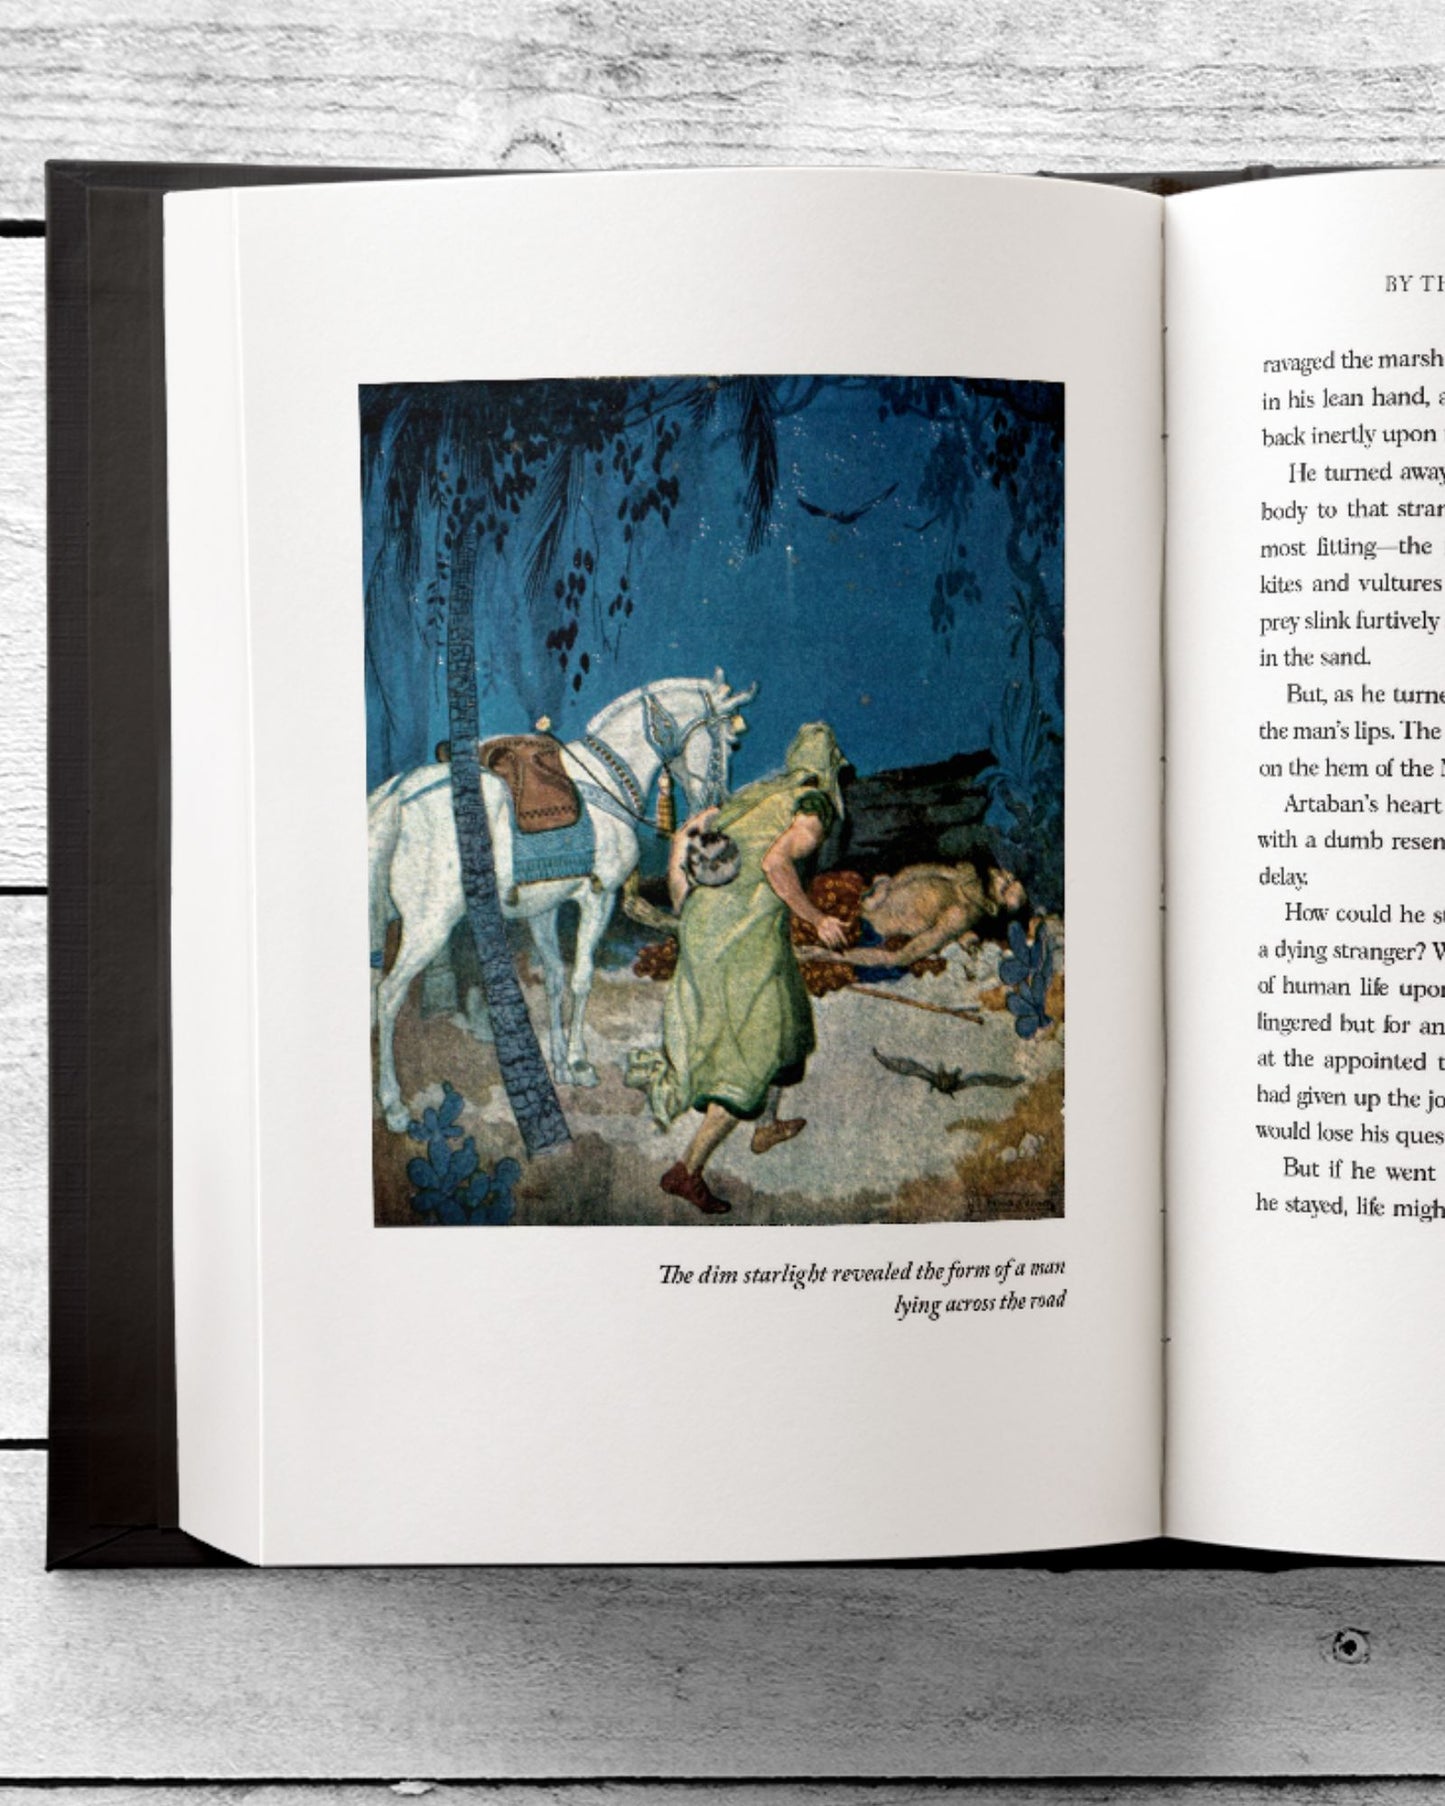 An inside peek into one of the restored illustrations within the ornate book "The Story of the Other Wise Man" and in the picture a white horse and his owner carefully approach a wounded man. The book lies open to this page resting on a rustic white table.